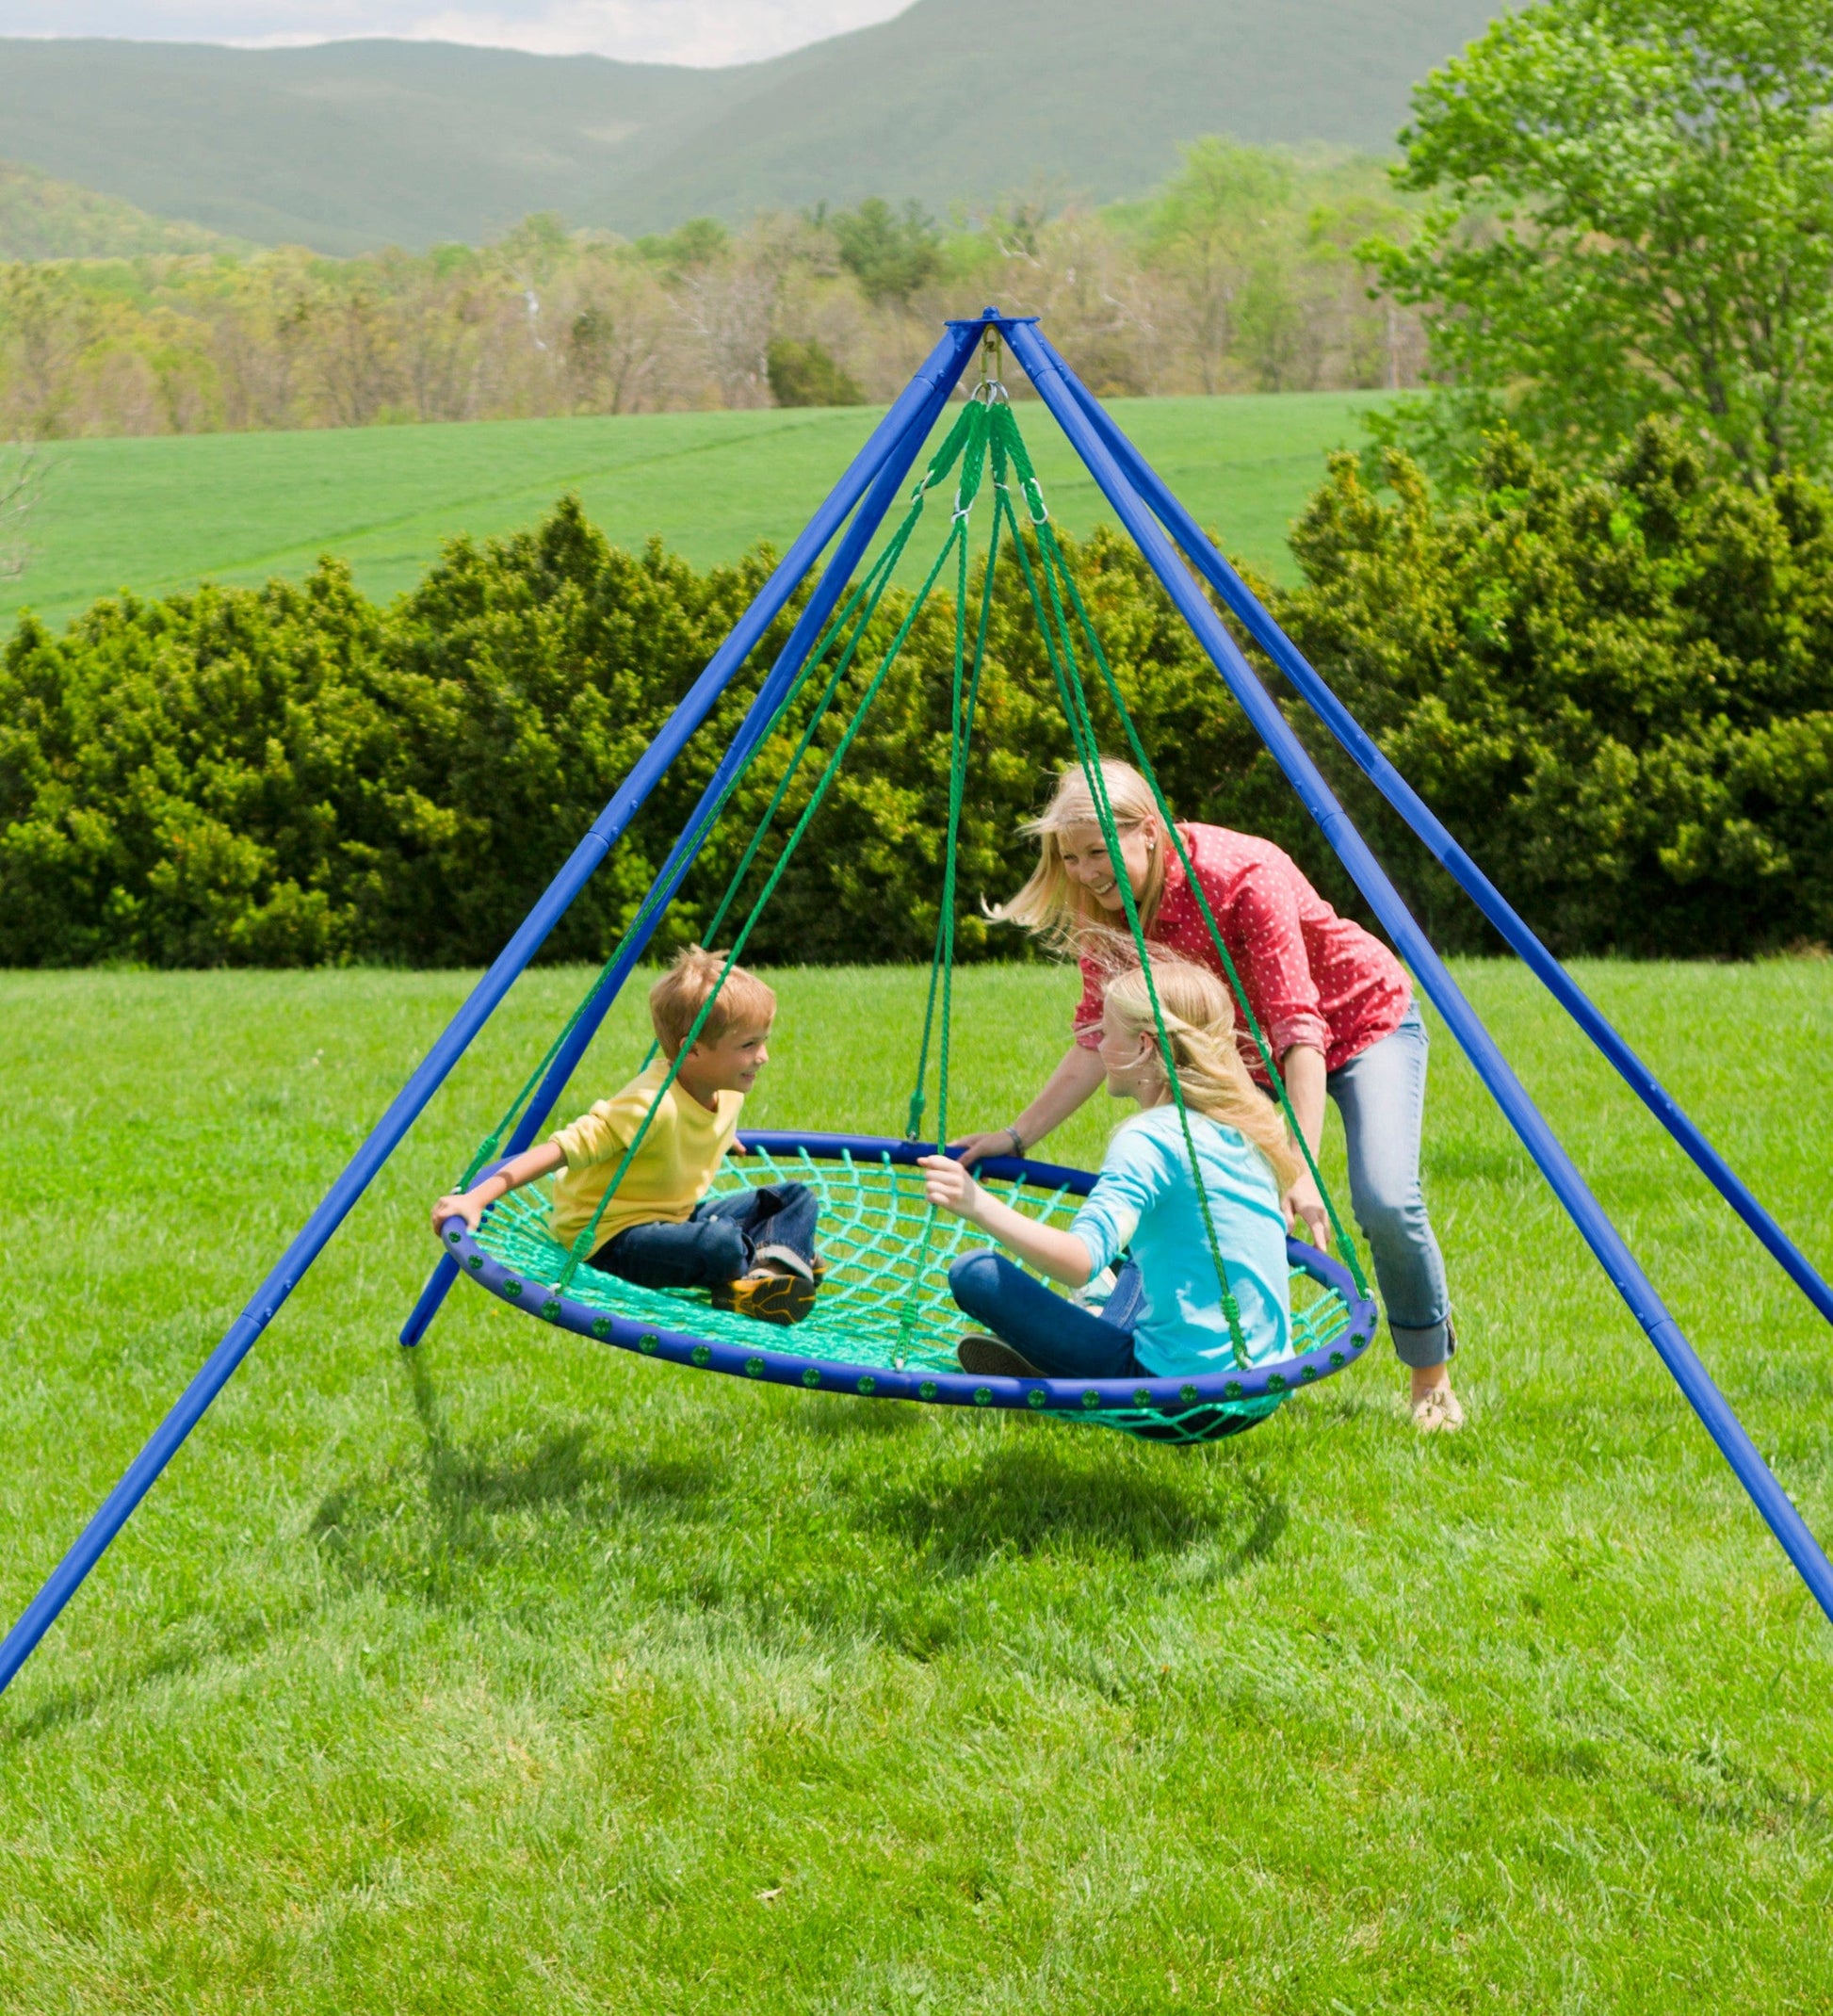 60-Inch Sky Island Round Swing and Stand Set